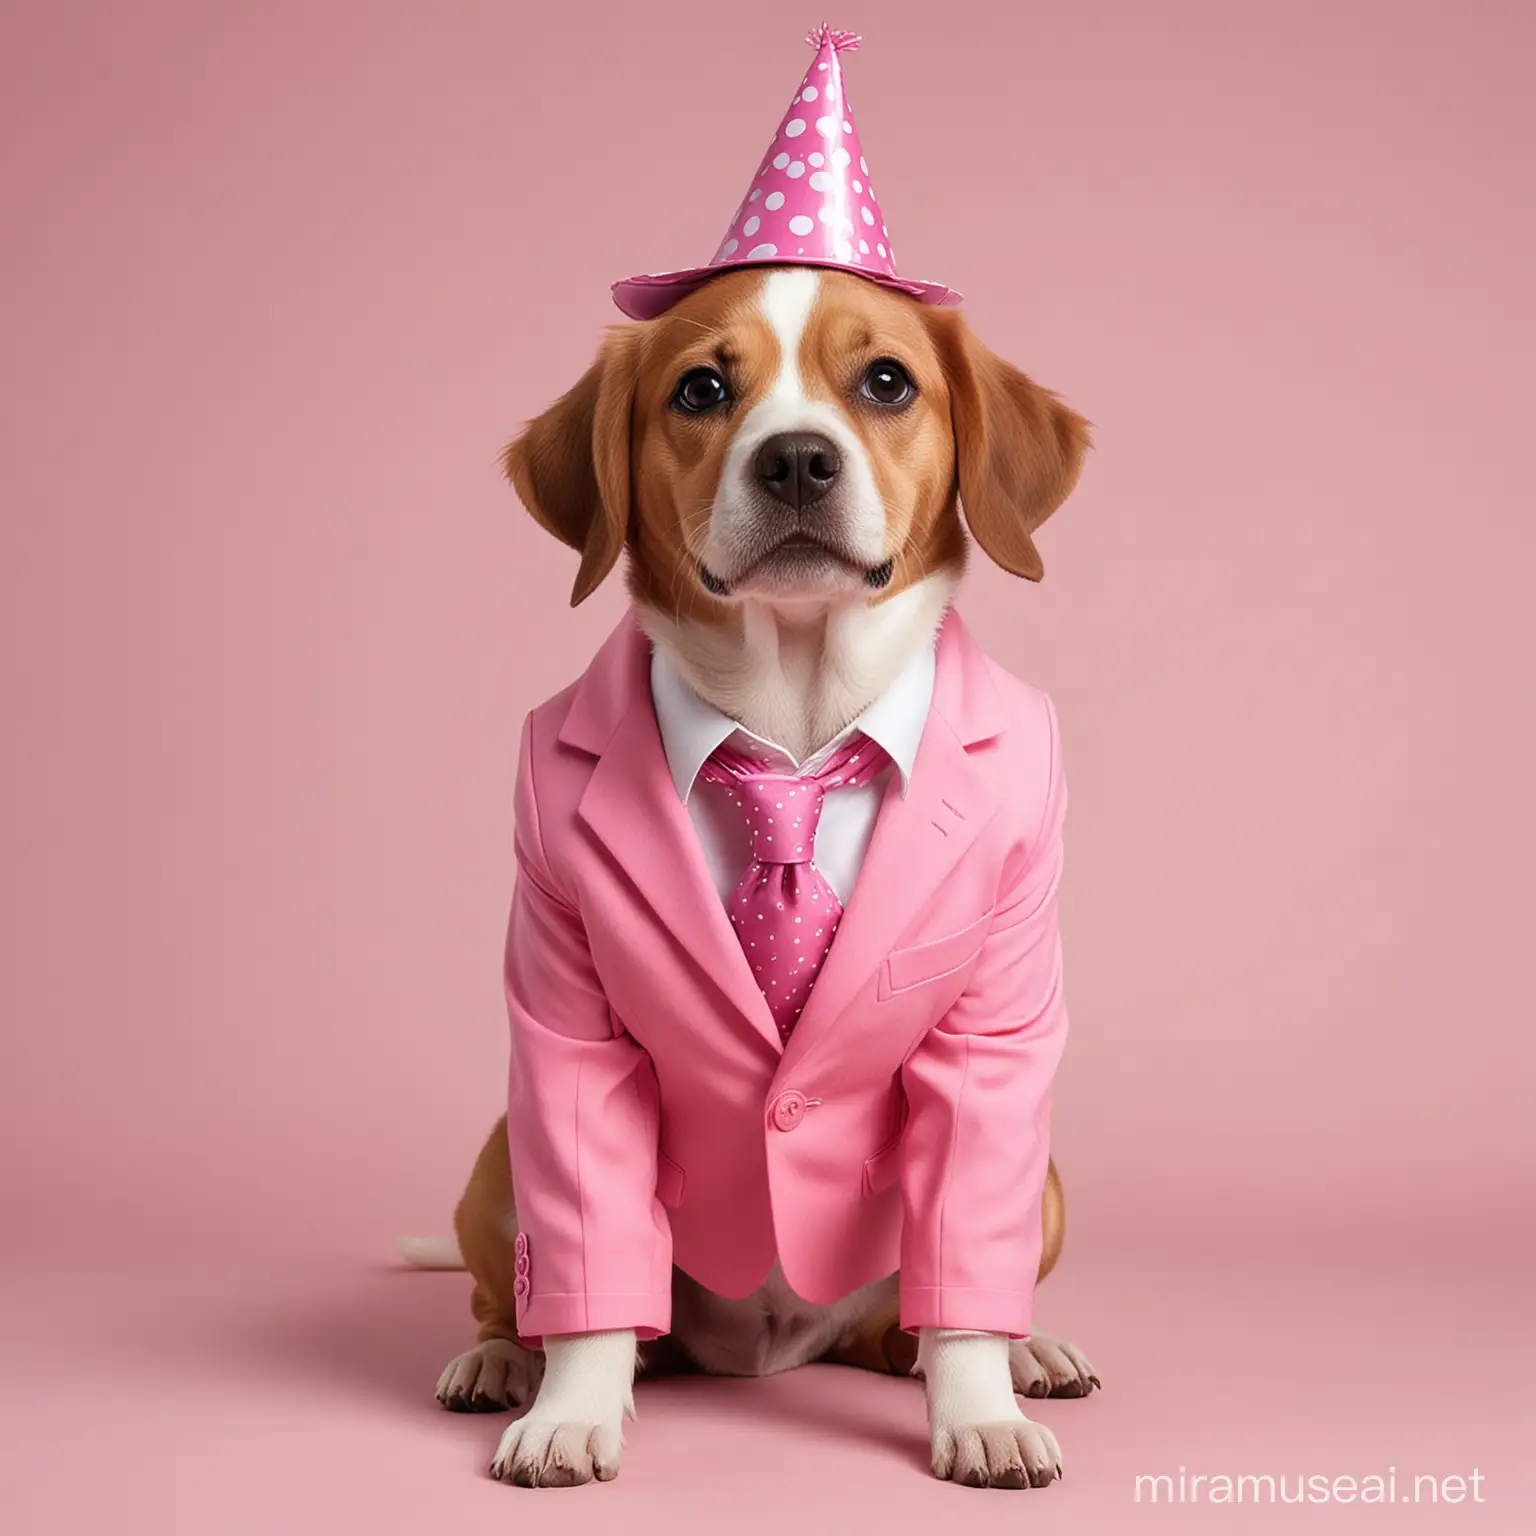 generate a girl dog with a pink business casual suit. Dog is happy. Add a party hat